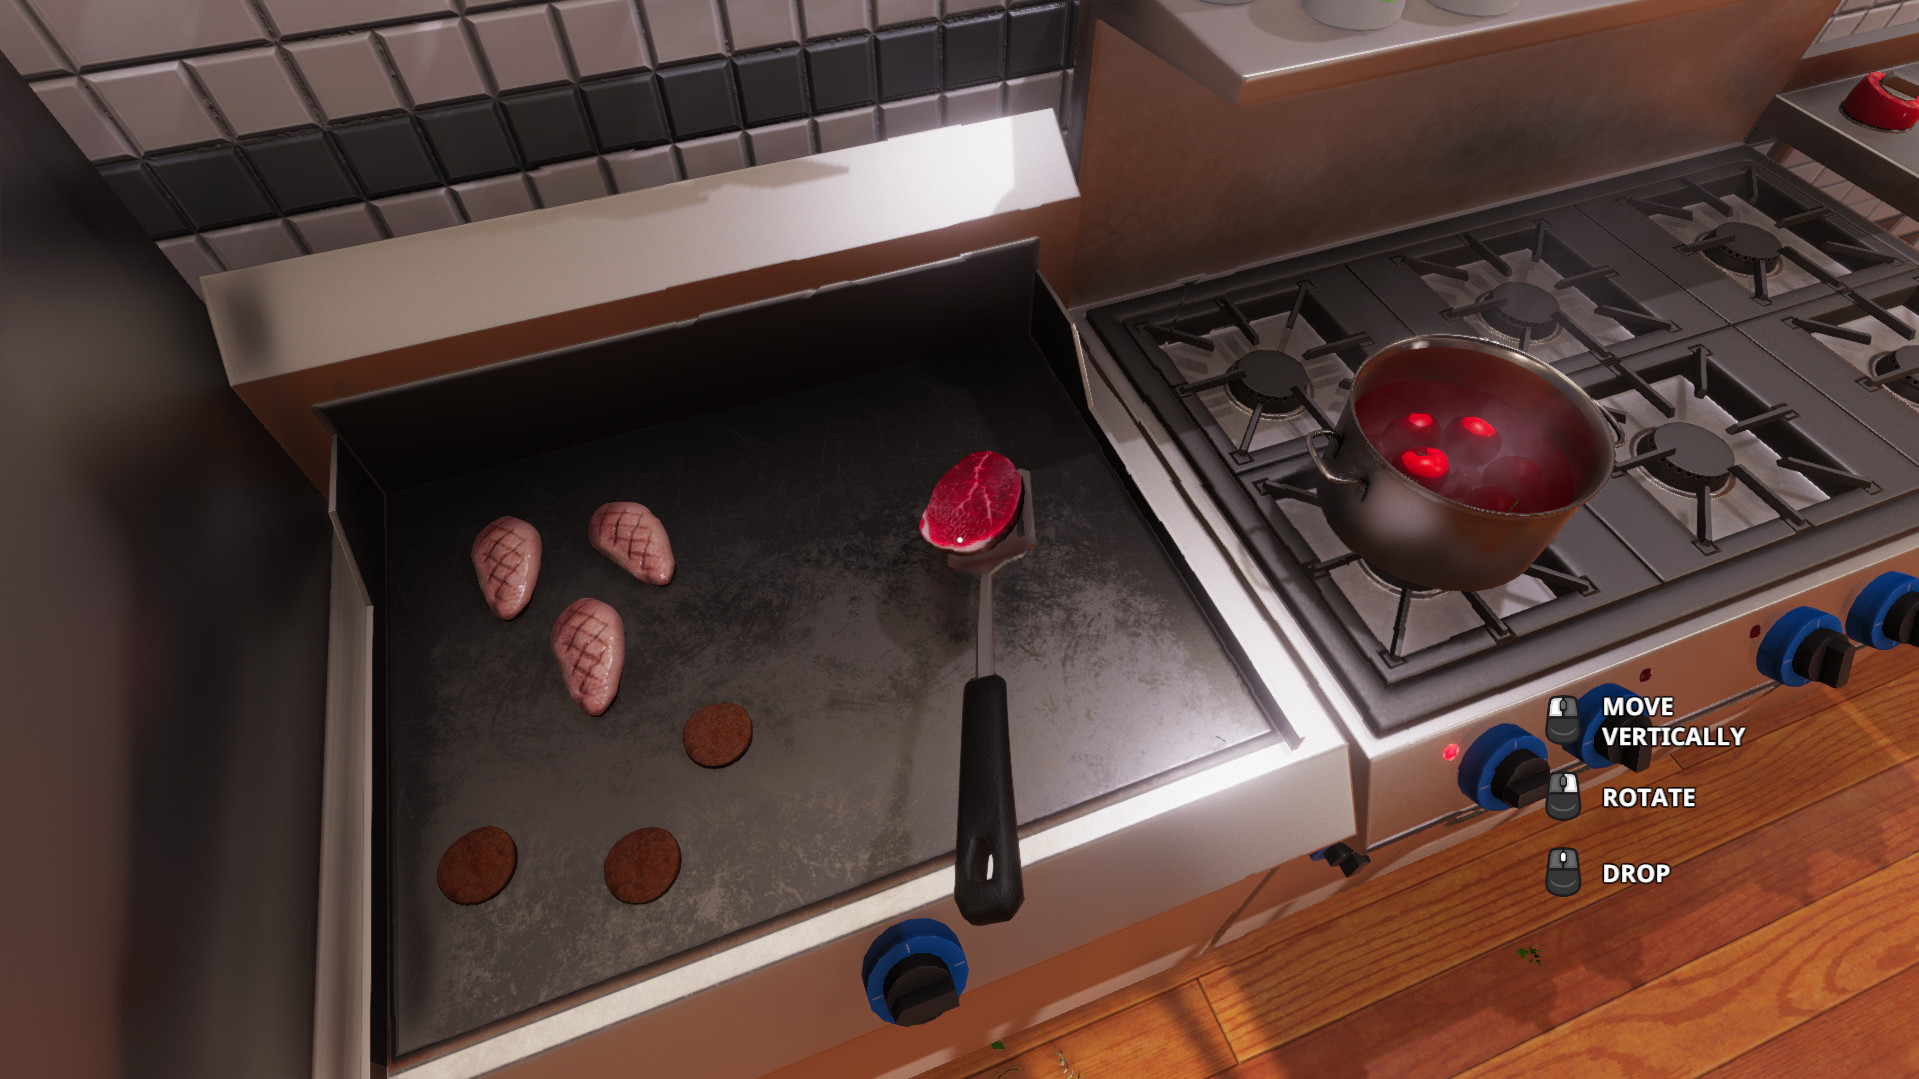 cooking simulator switch